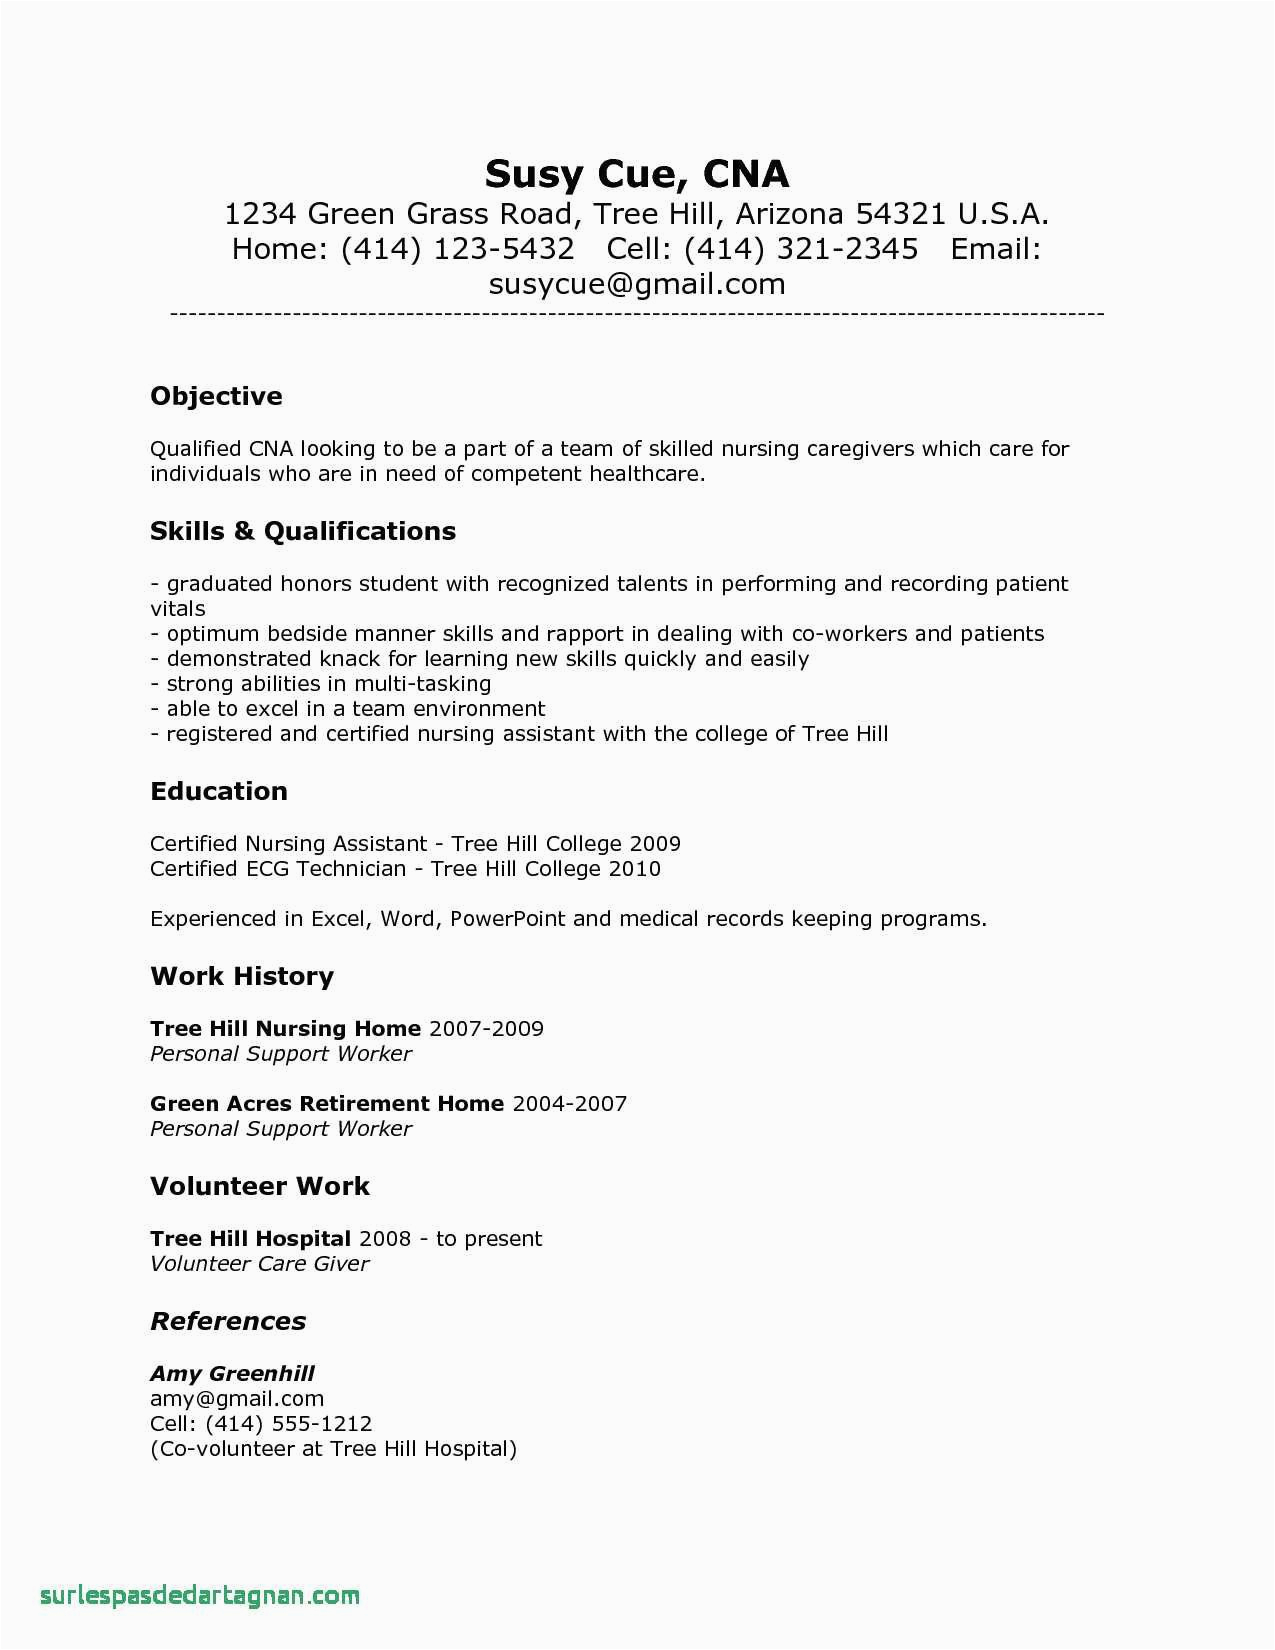 Resume Sample for Nurses In the Philippines Sample Resume Registered Nurse Philippines Resume format for New